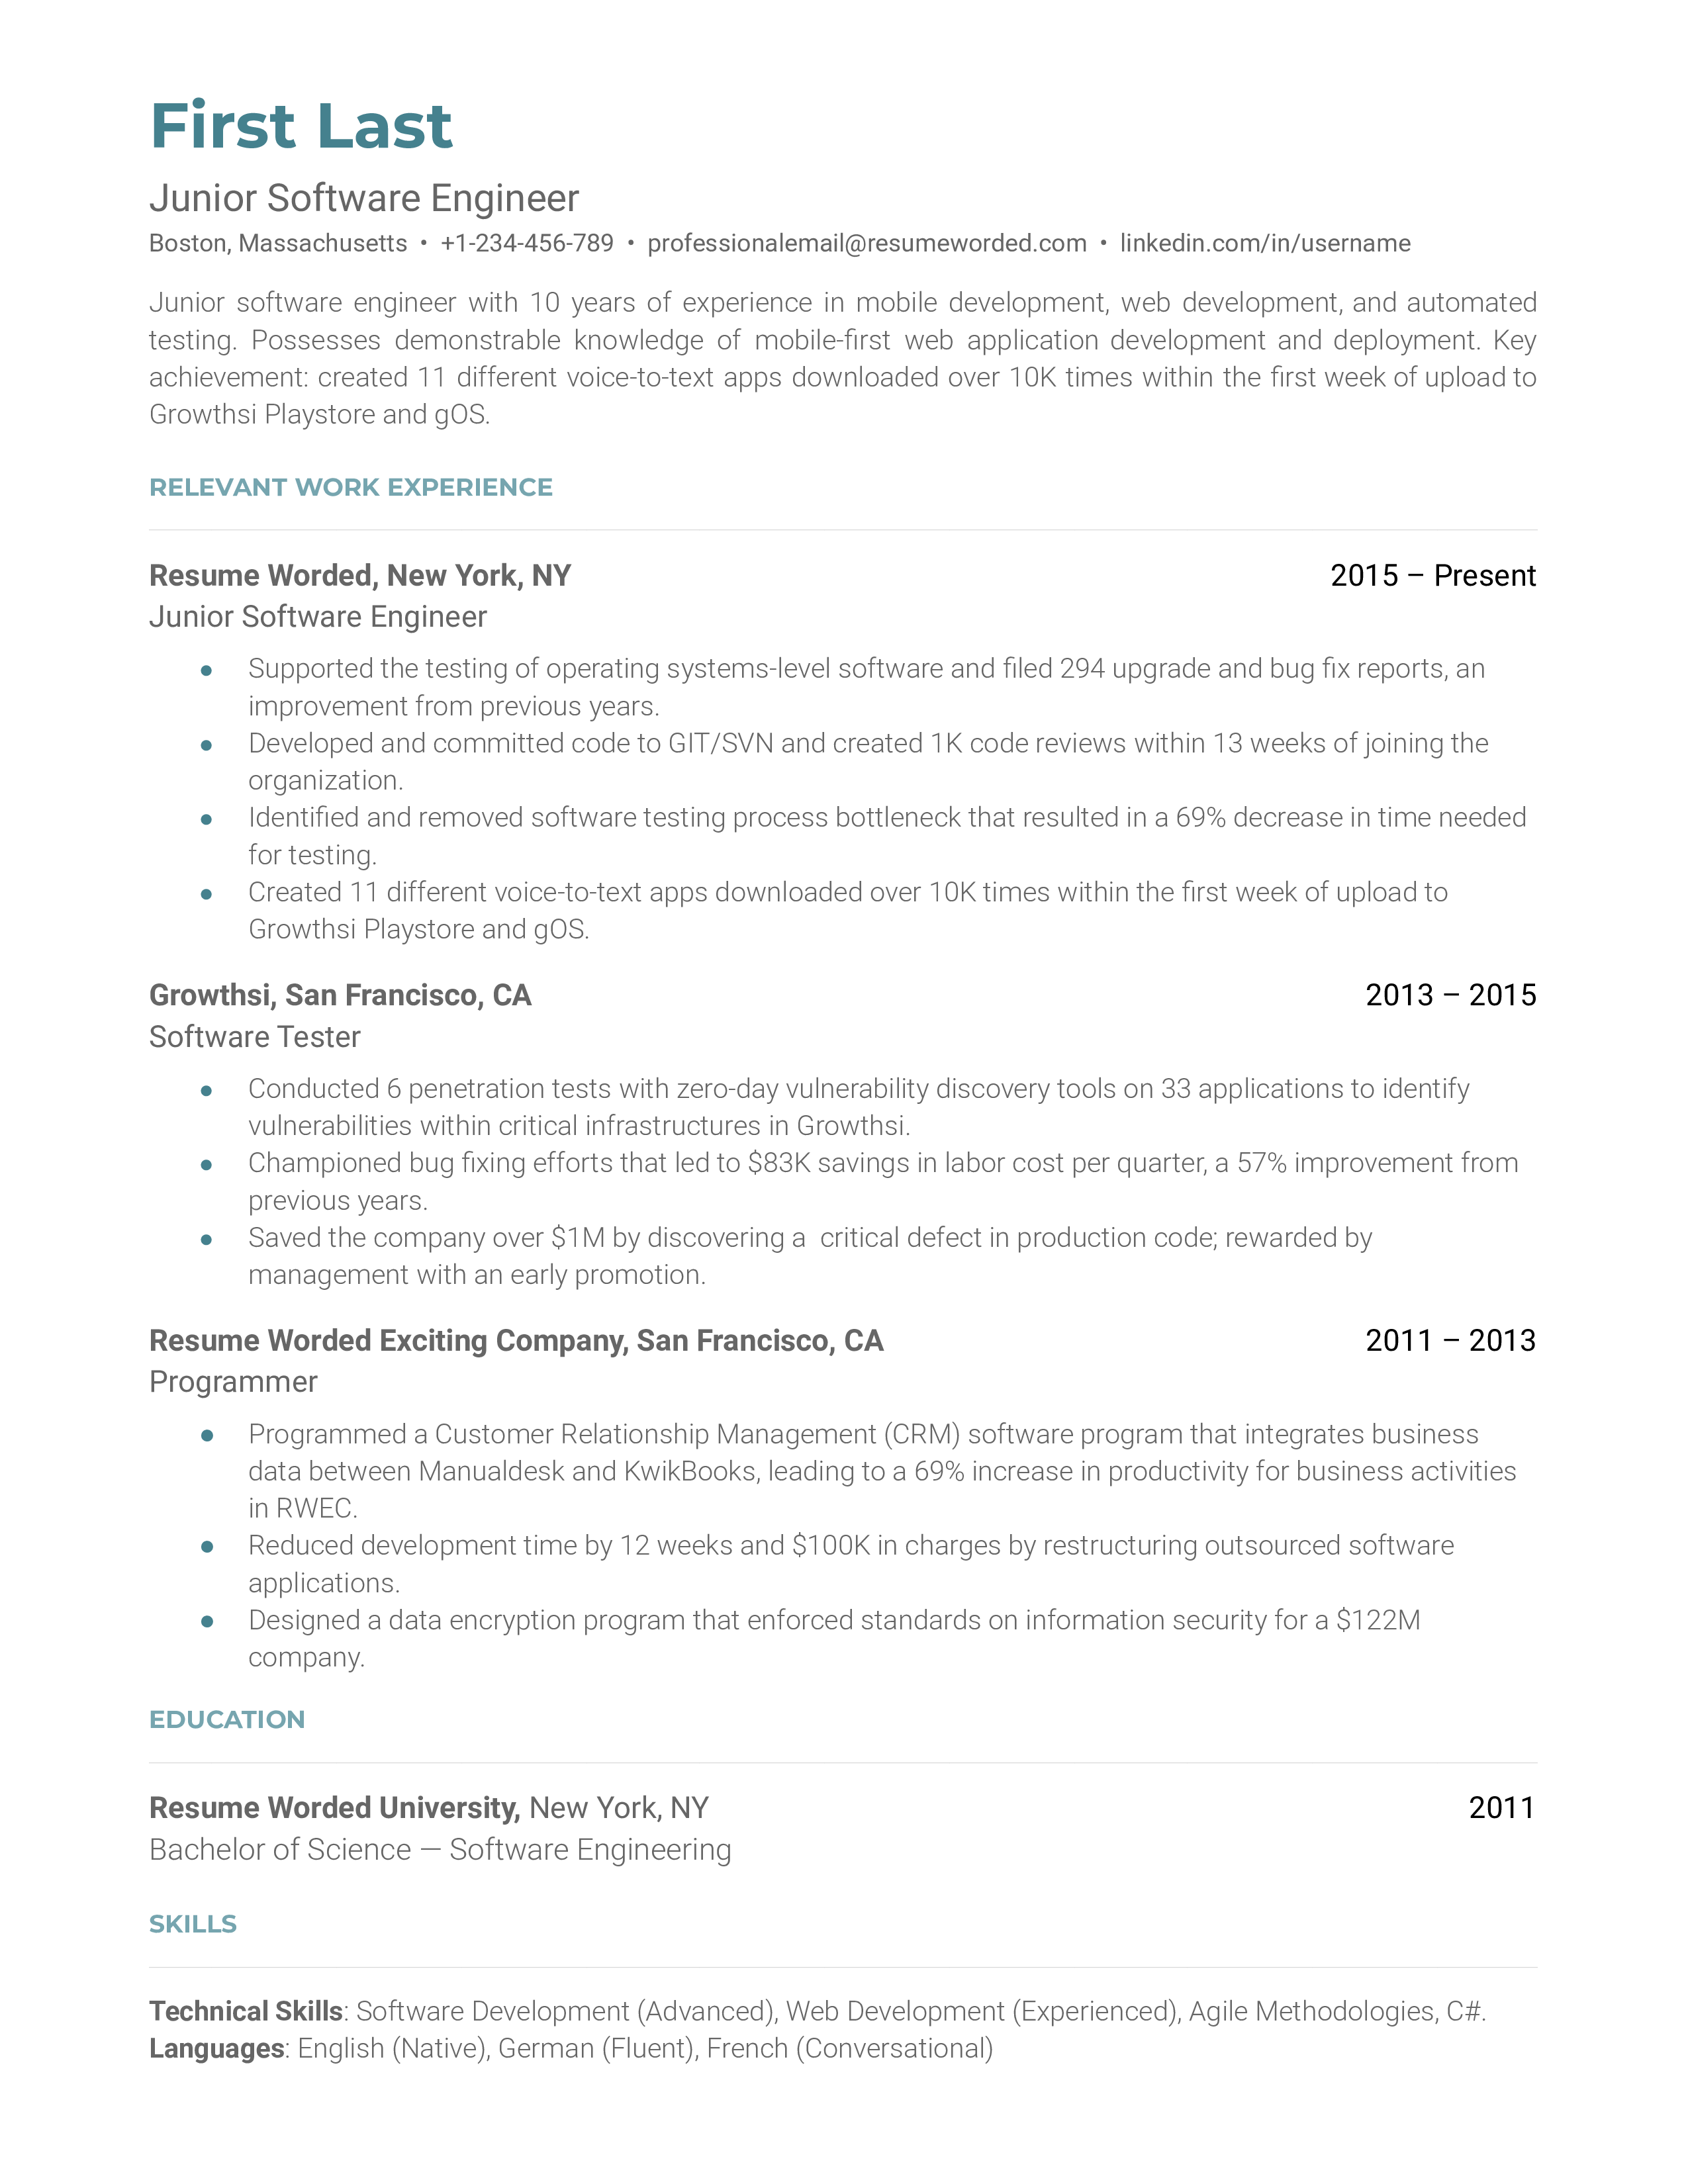 An exemplary CV of a Junior Software Engineer showcasing relevant skills, personal projects, and methodology experience.